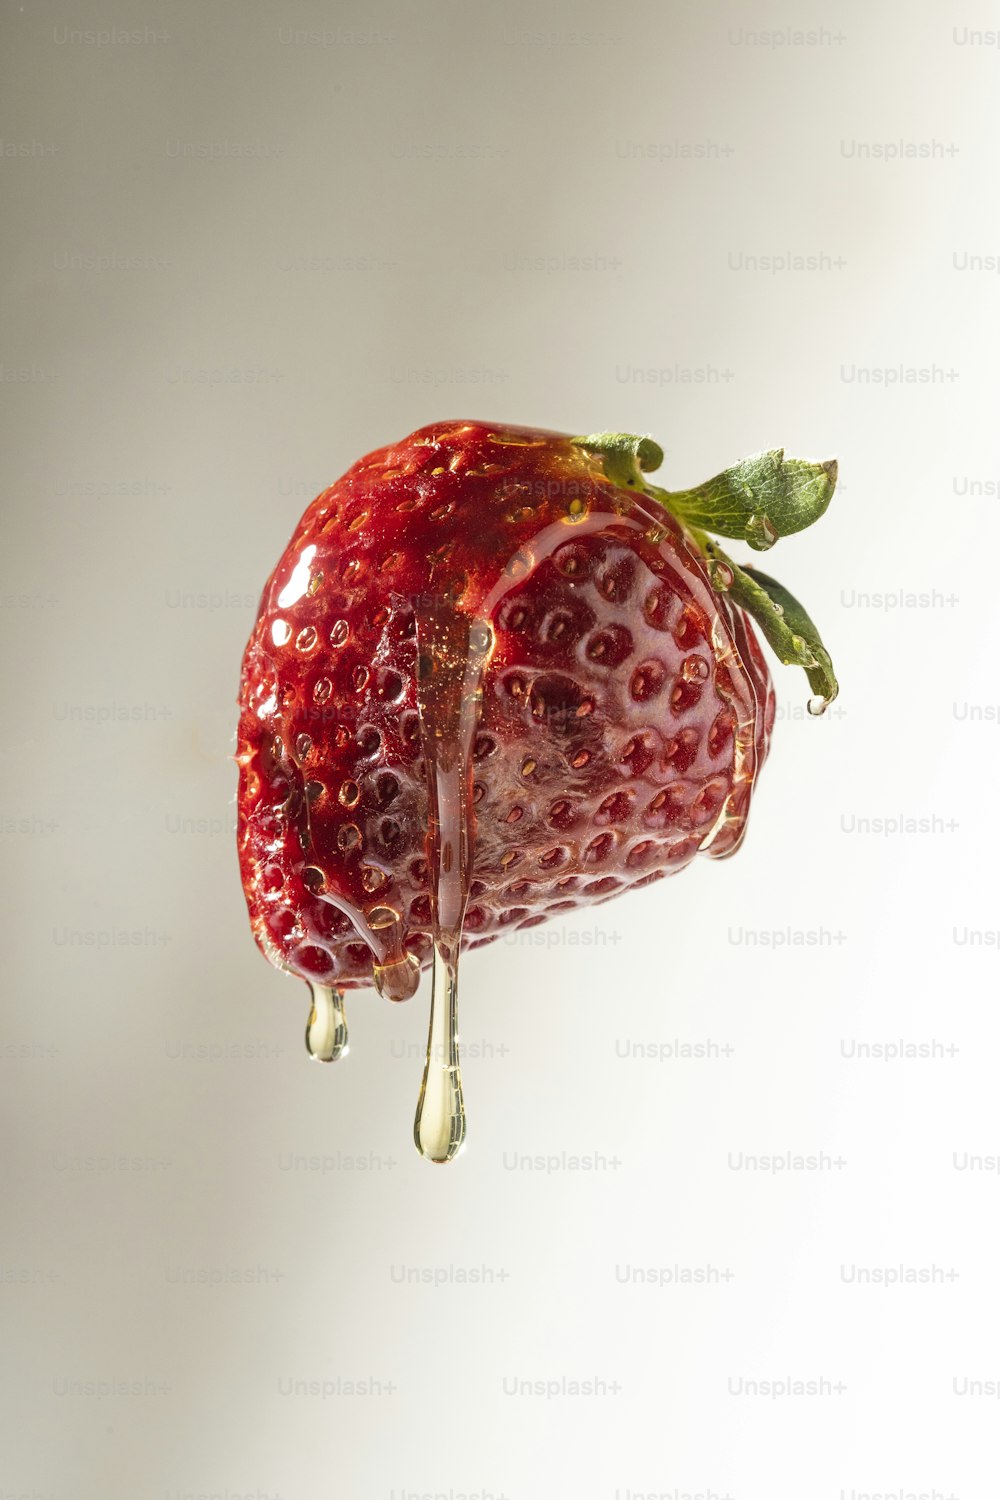 a strawberry with a drop of water on top of it